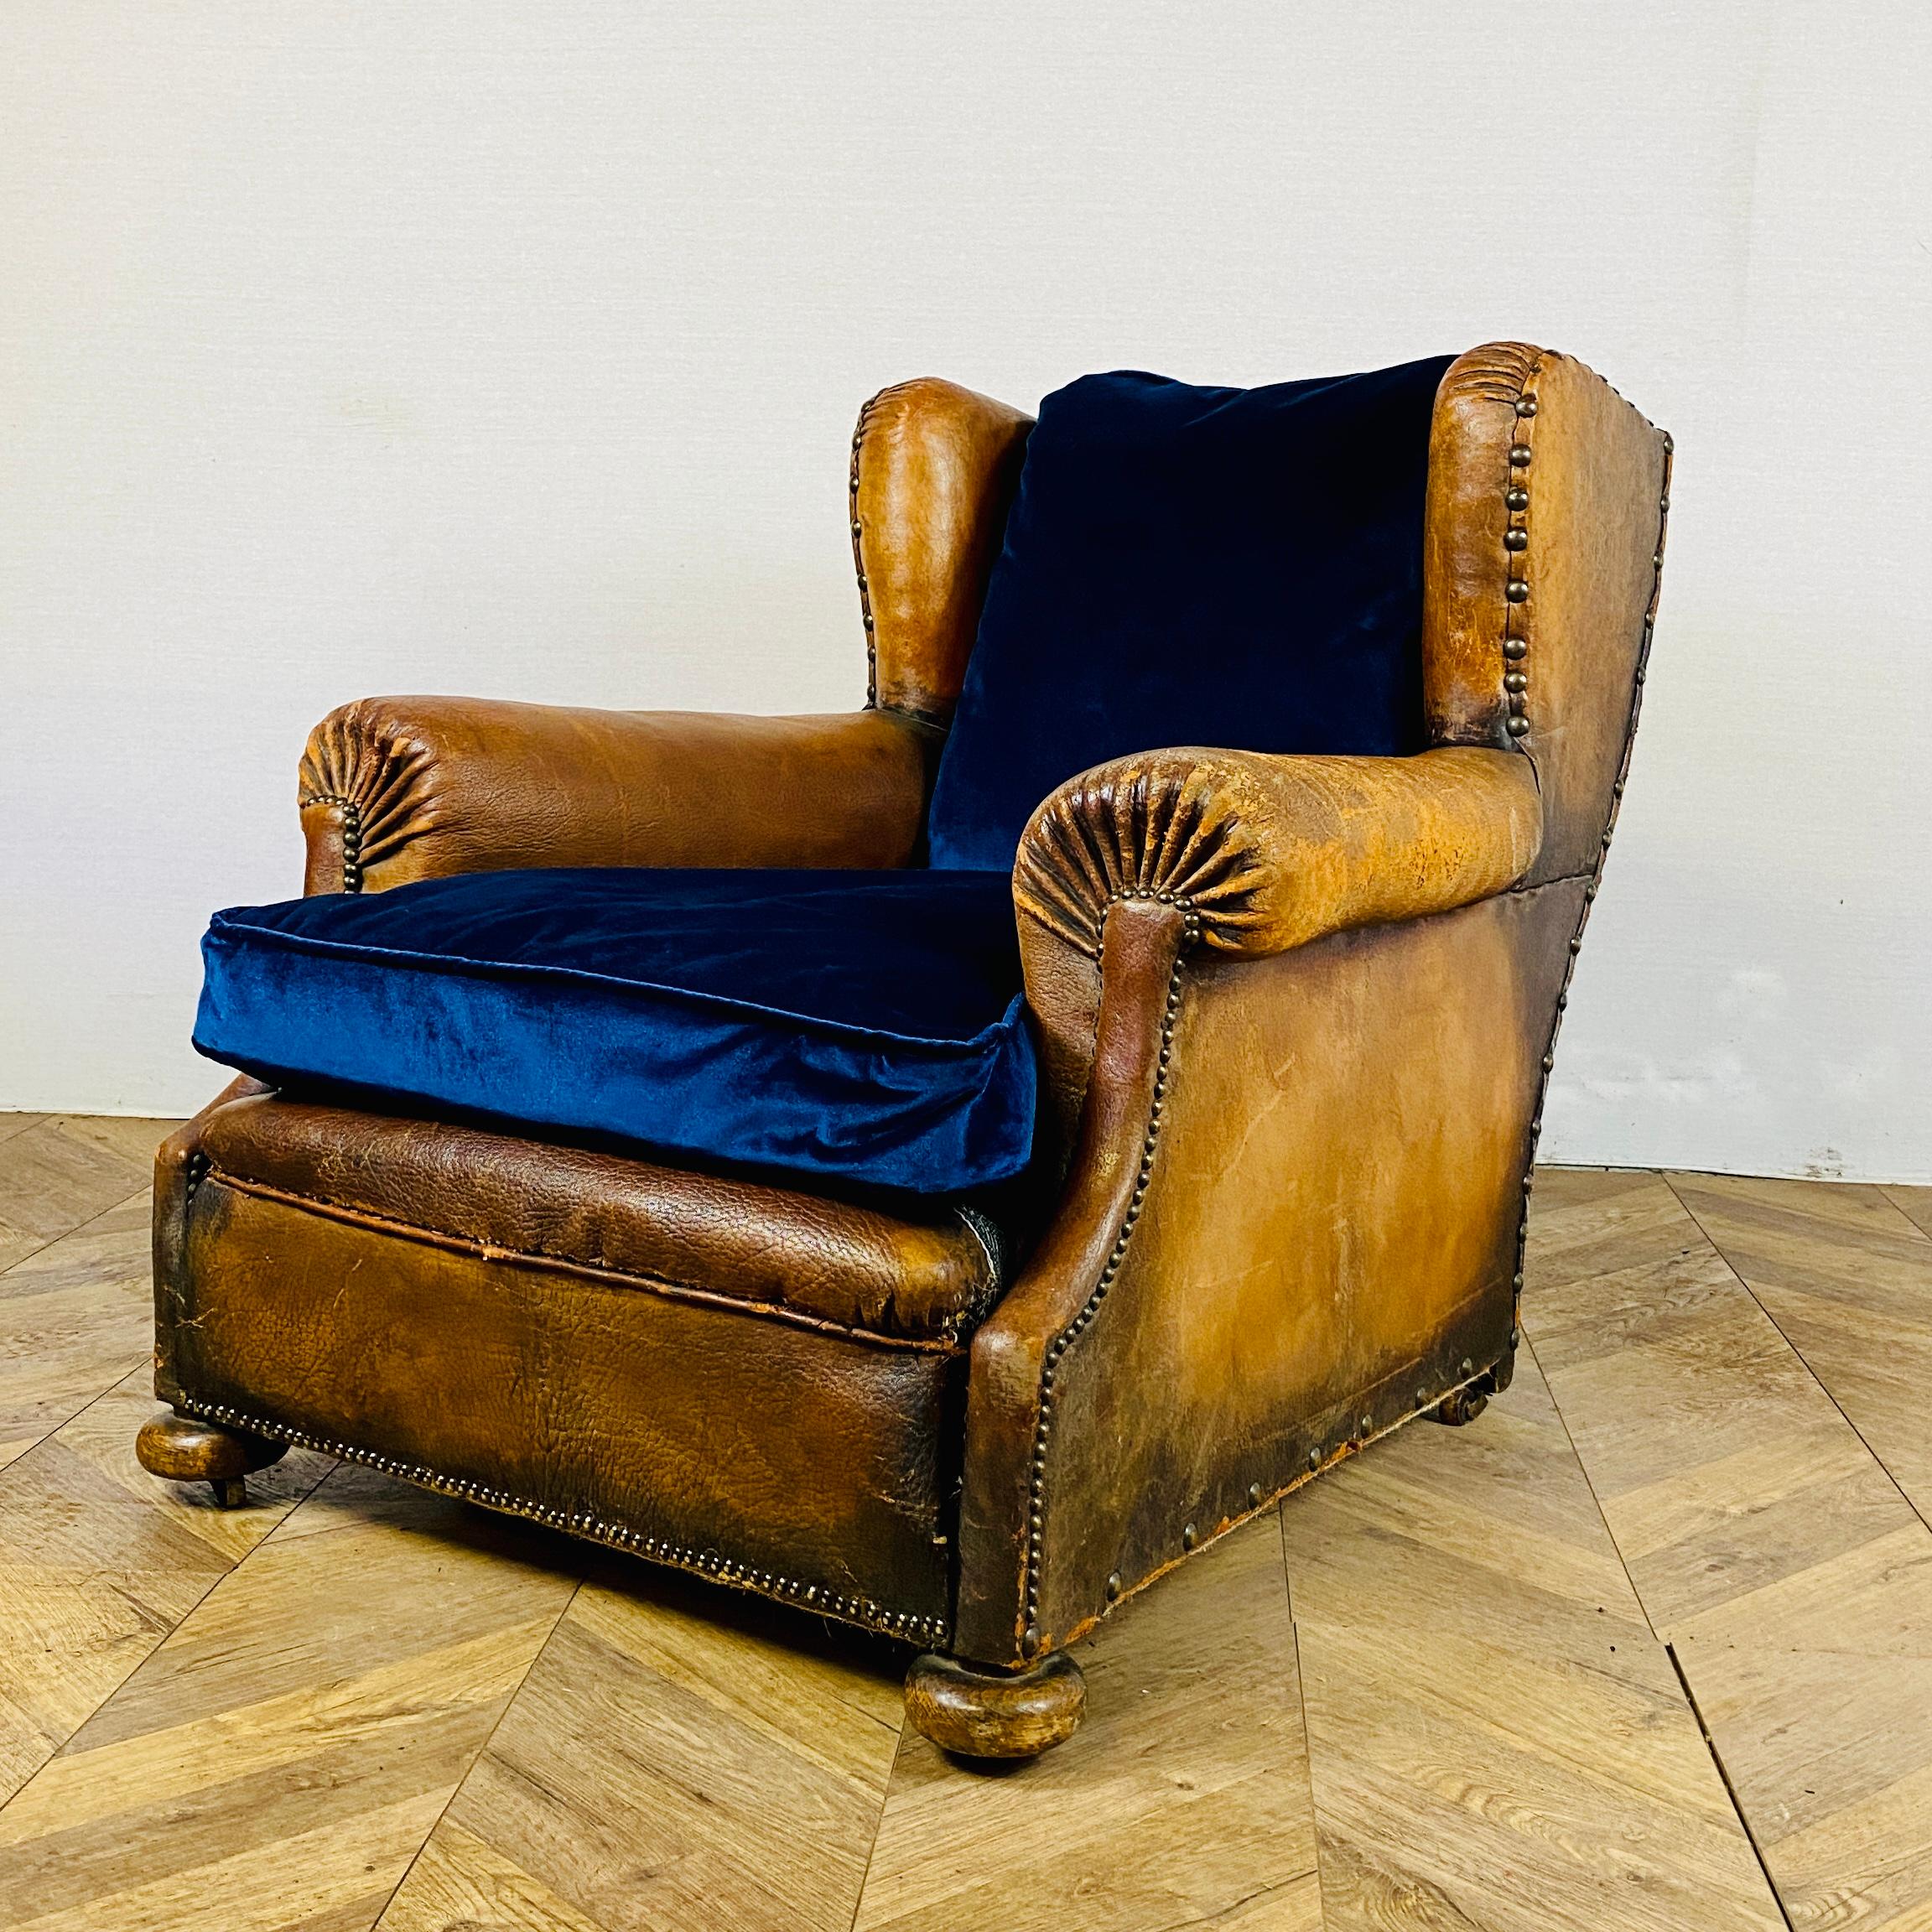 French Provincial Antique French Leather Club Armchair on Castors, circa 1900s